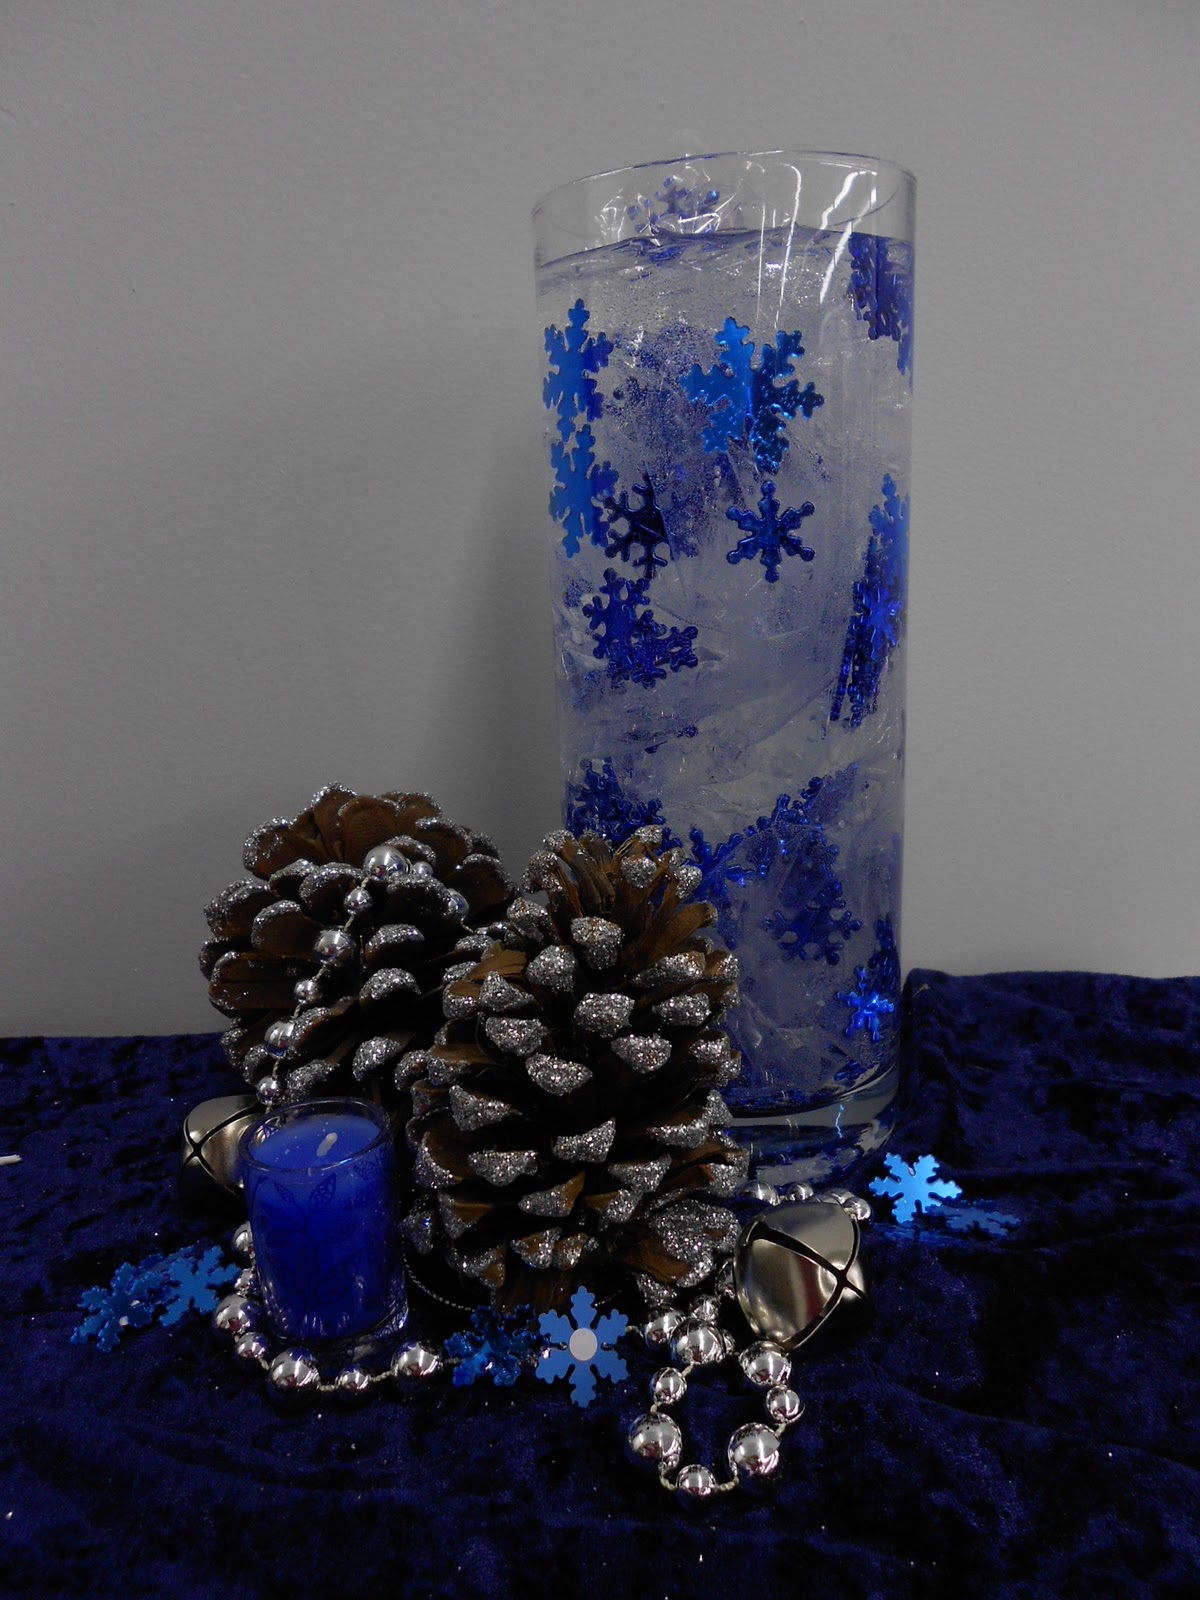 church-christmas-decorations-in-glass-vase